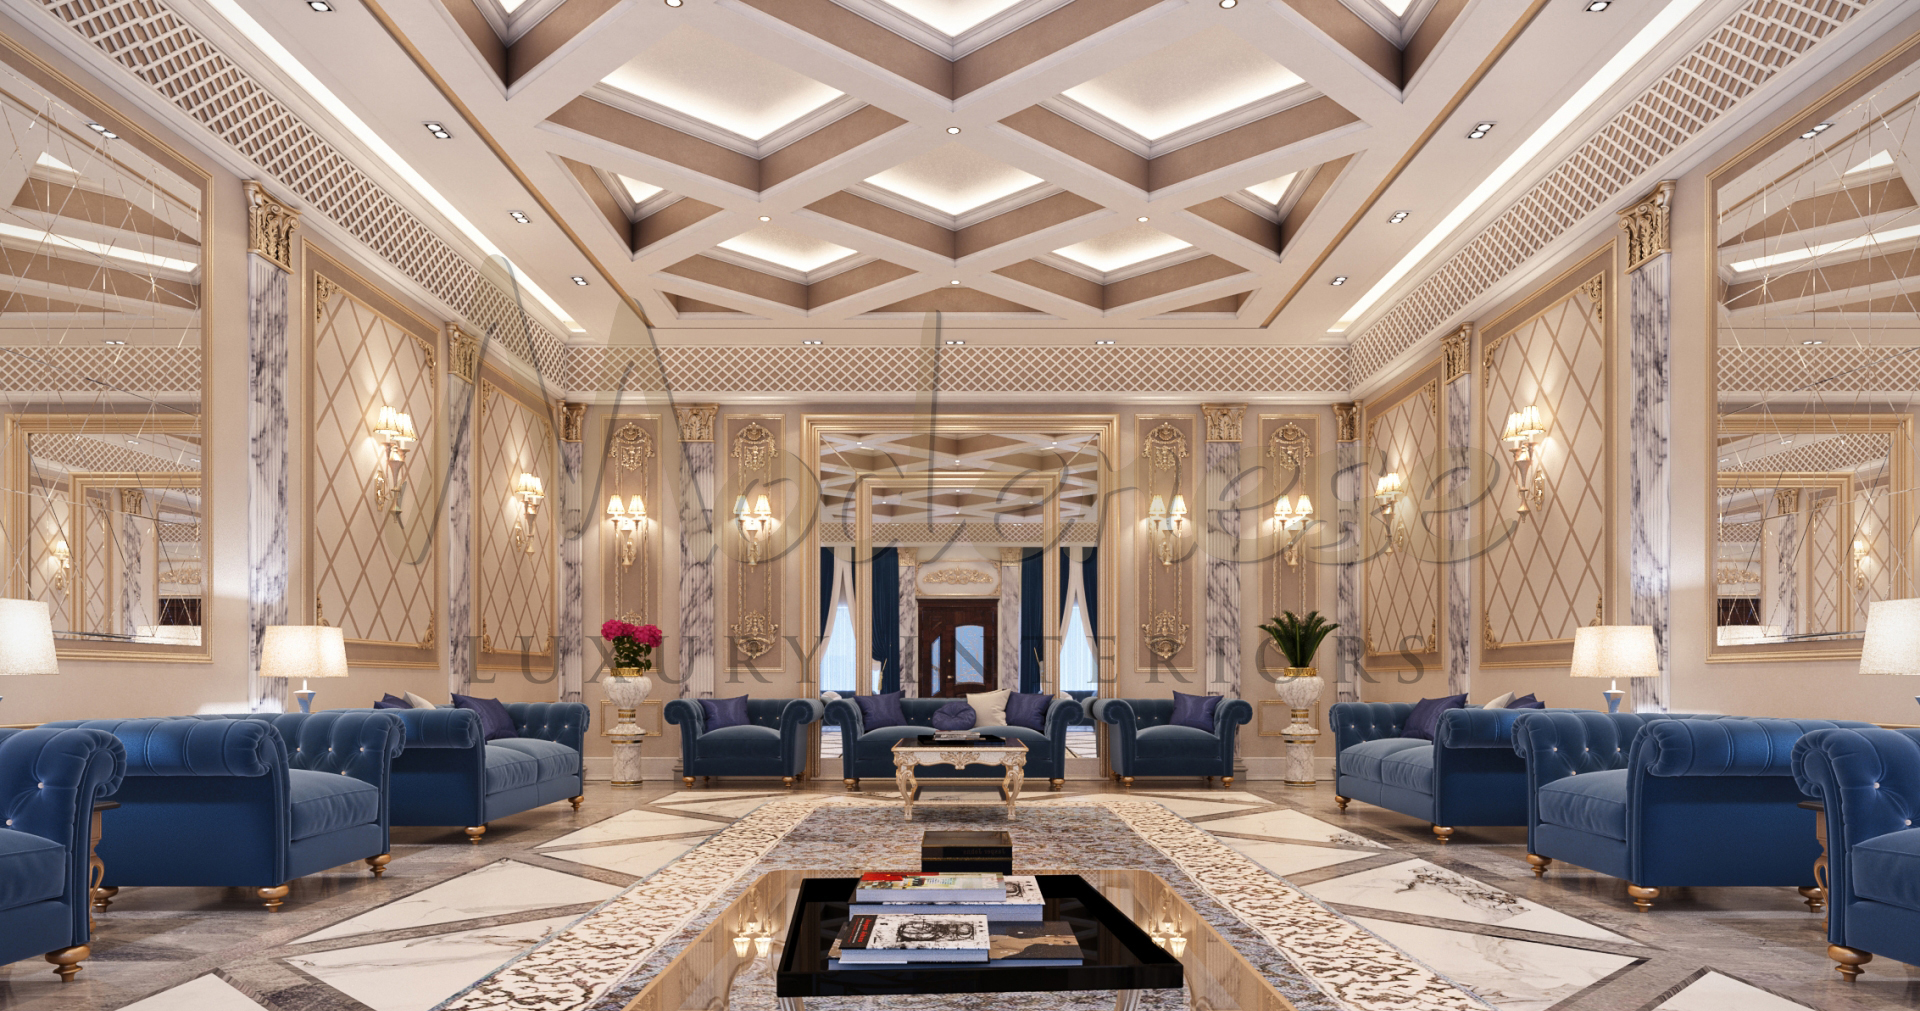 Customized furniture project, elegant handcrafted furniture. Classy interiors with Italian unique and exclusive furniture. Exclusive furniture manufacturing in Italy. Best Interior Design Company in Muscat,Oman